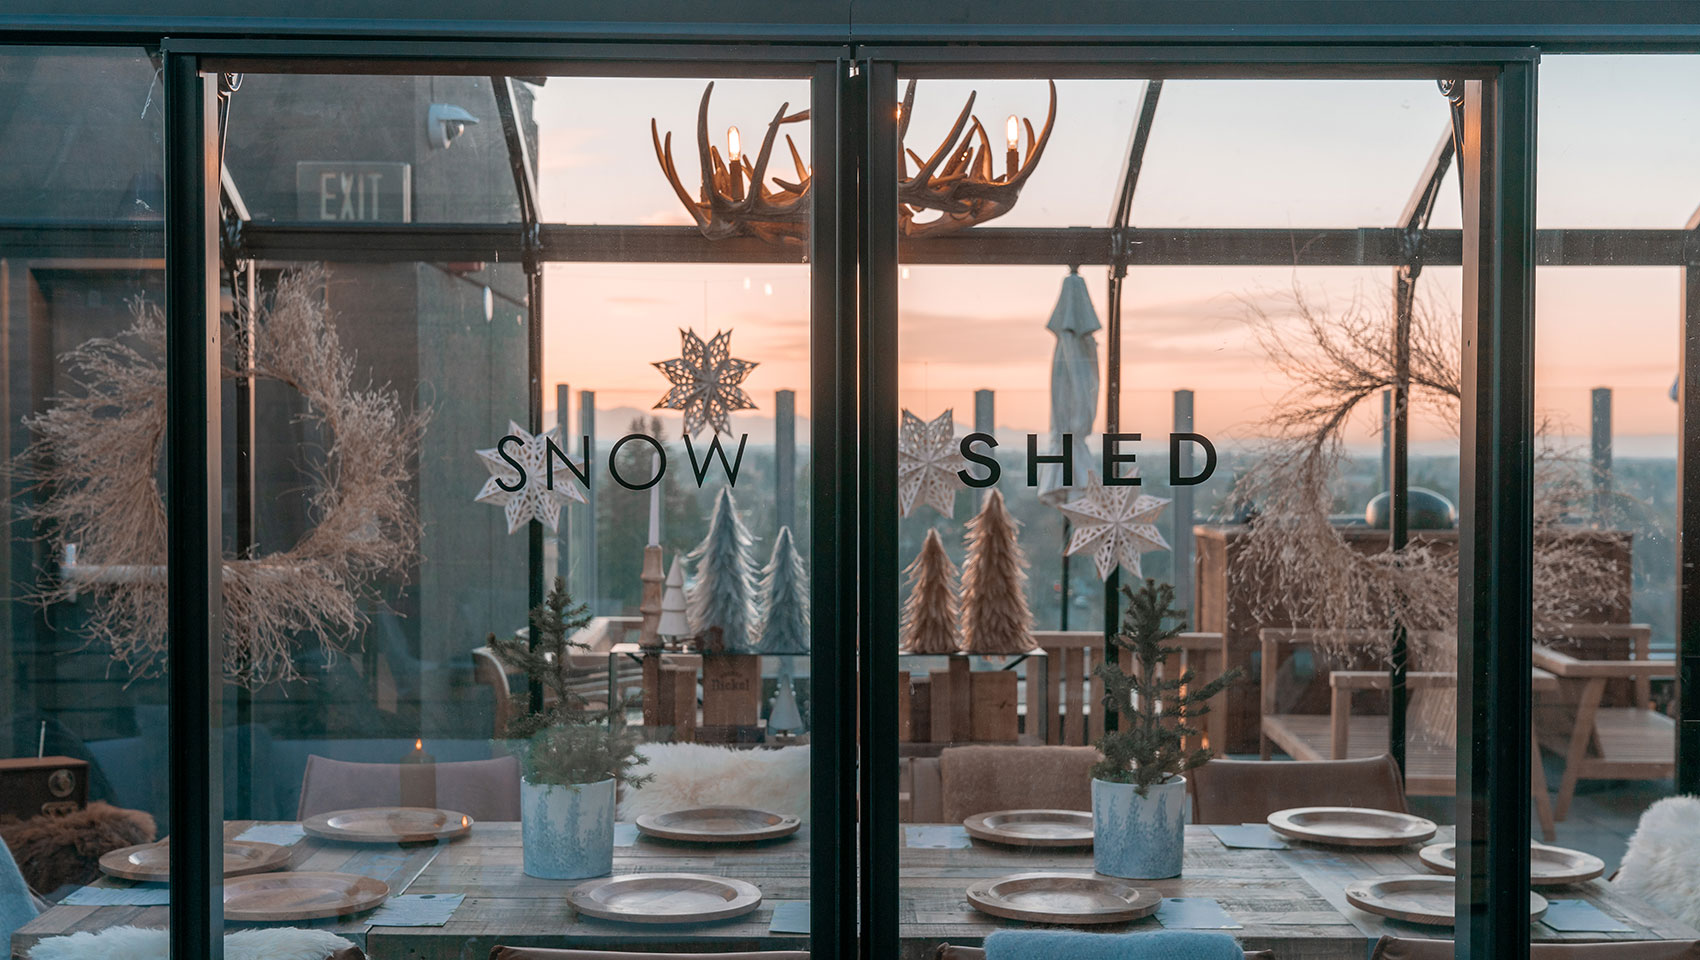 winter chalet experience at sky shed